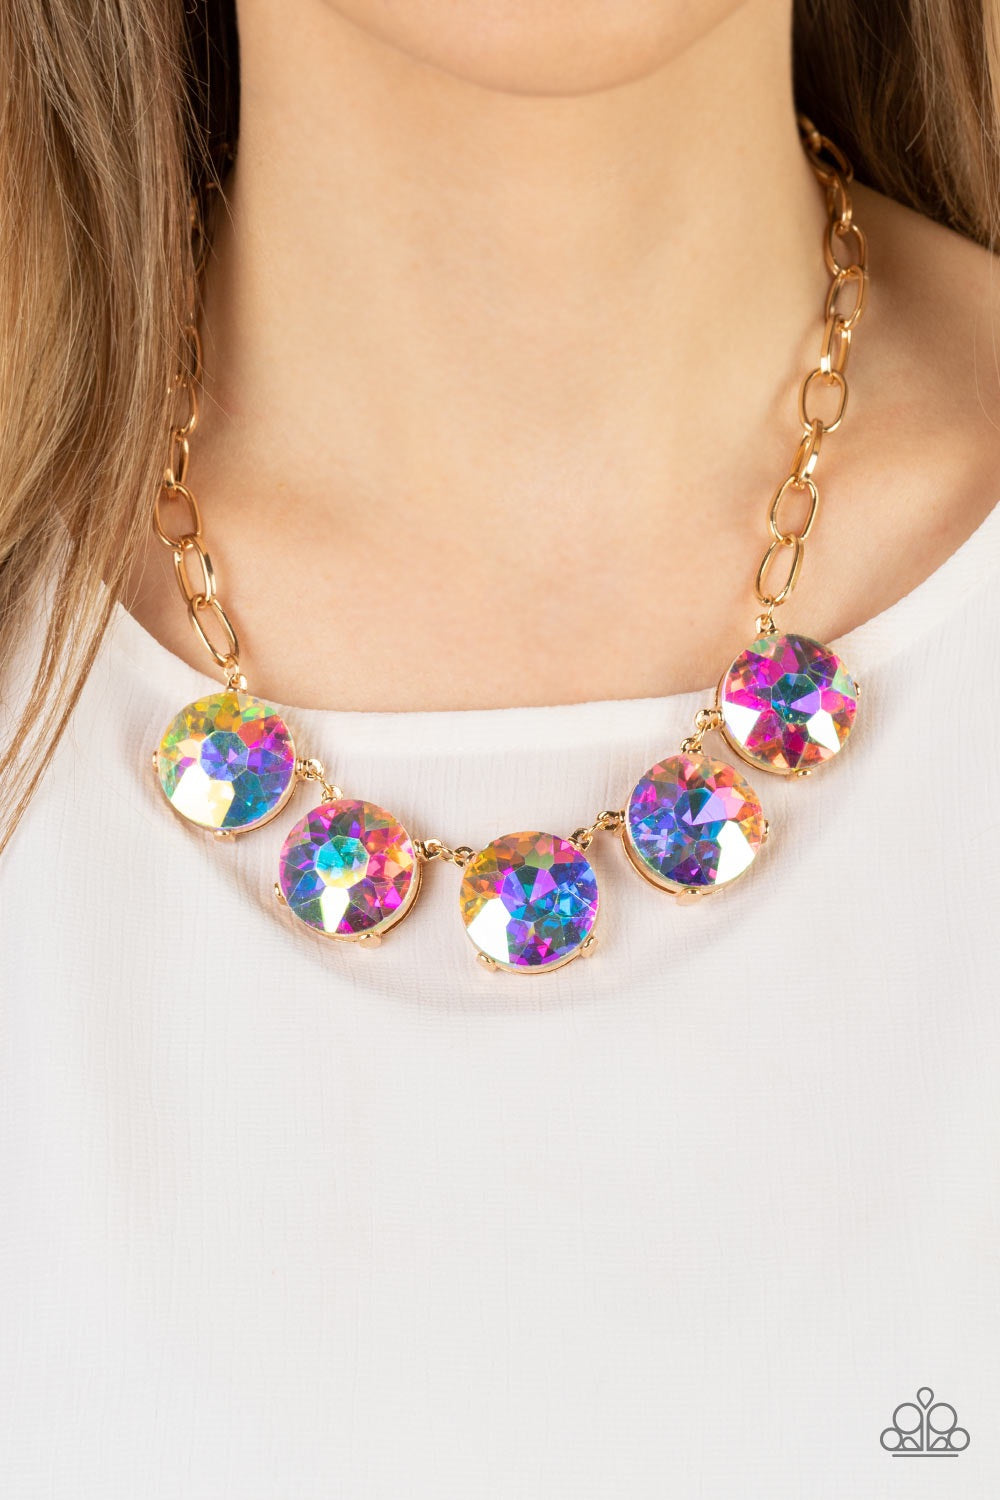 Paparazzi Limelight Luxury - Multi Necklace - A Finishing Touch Jewelry